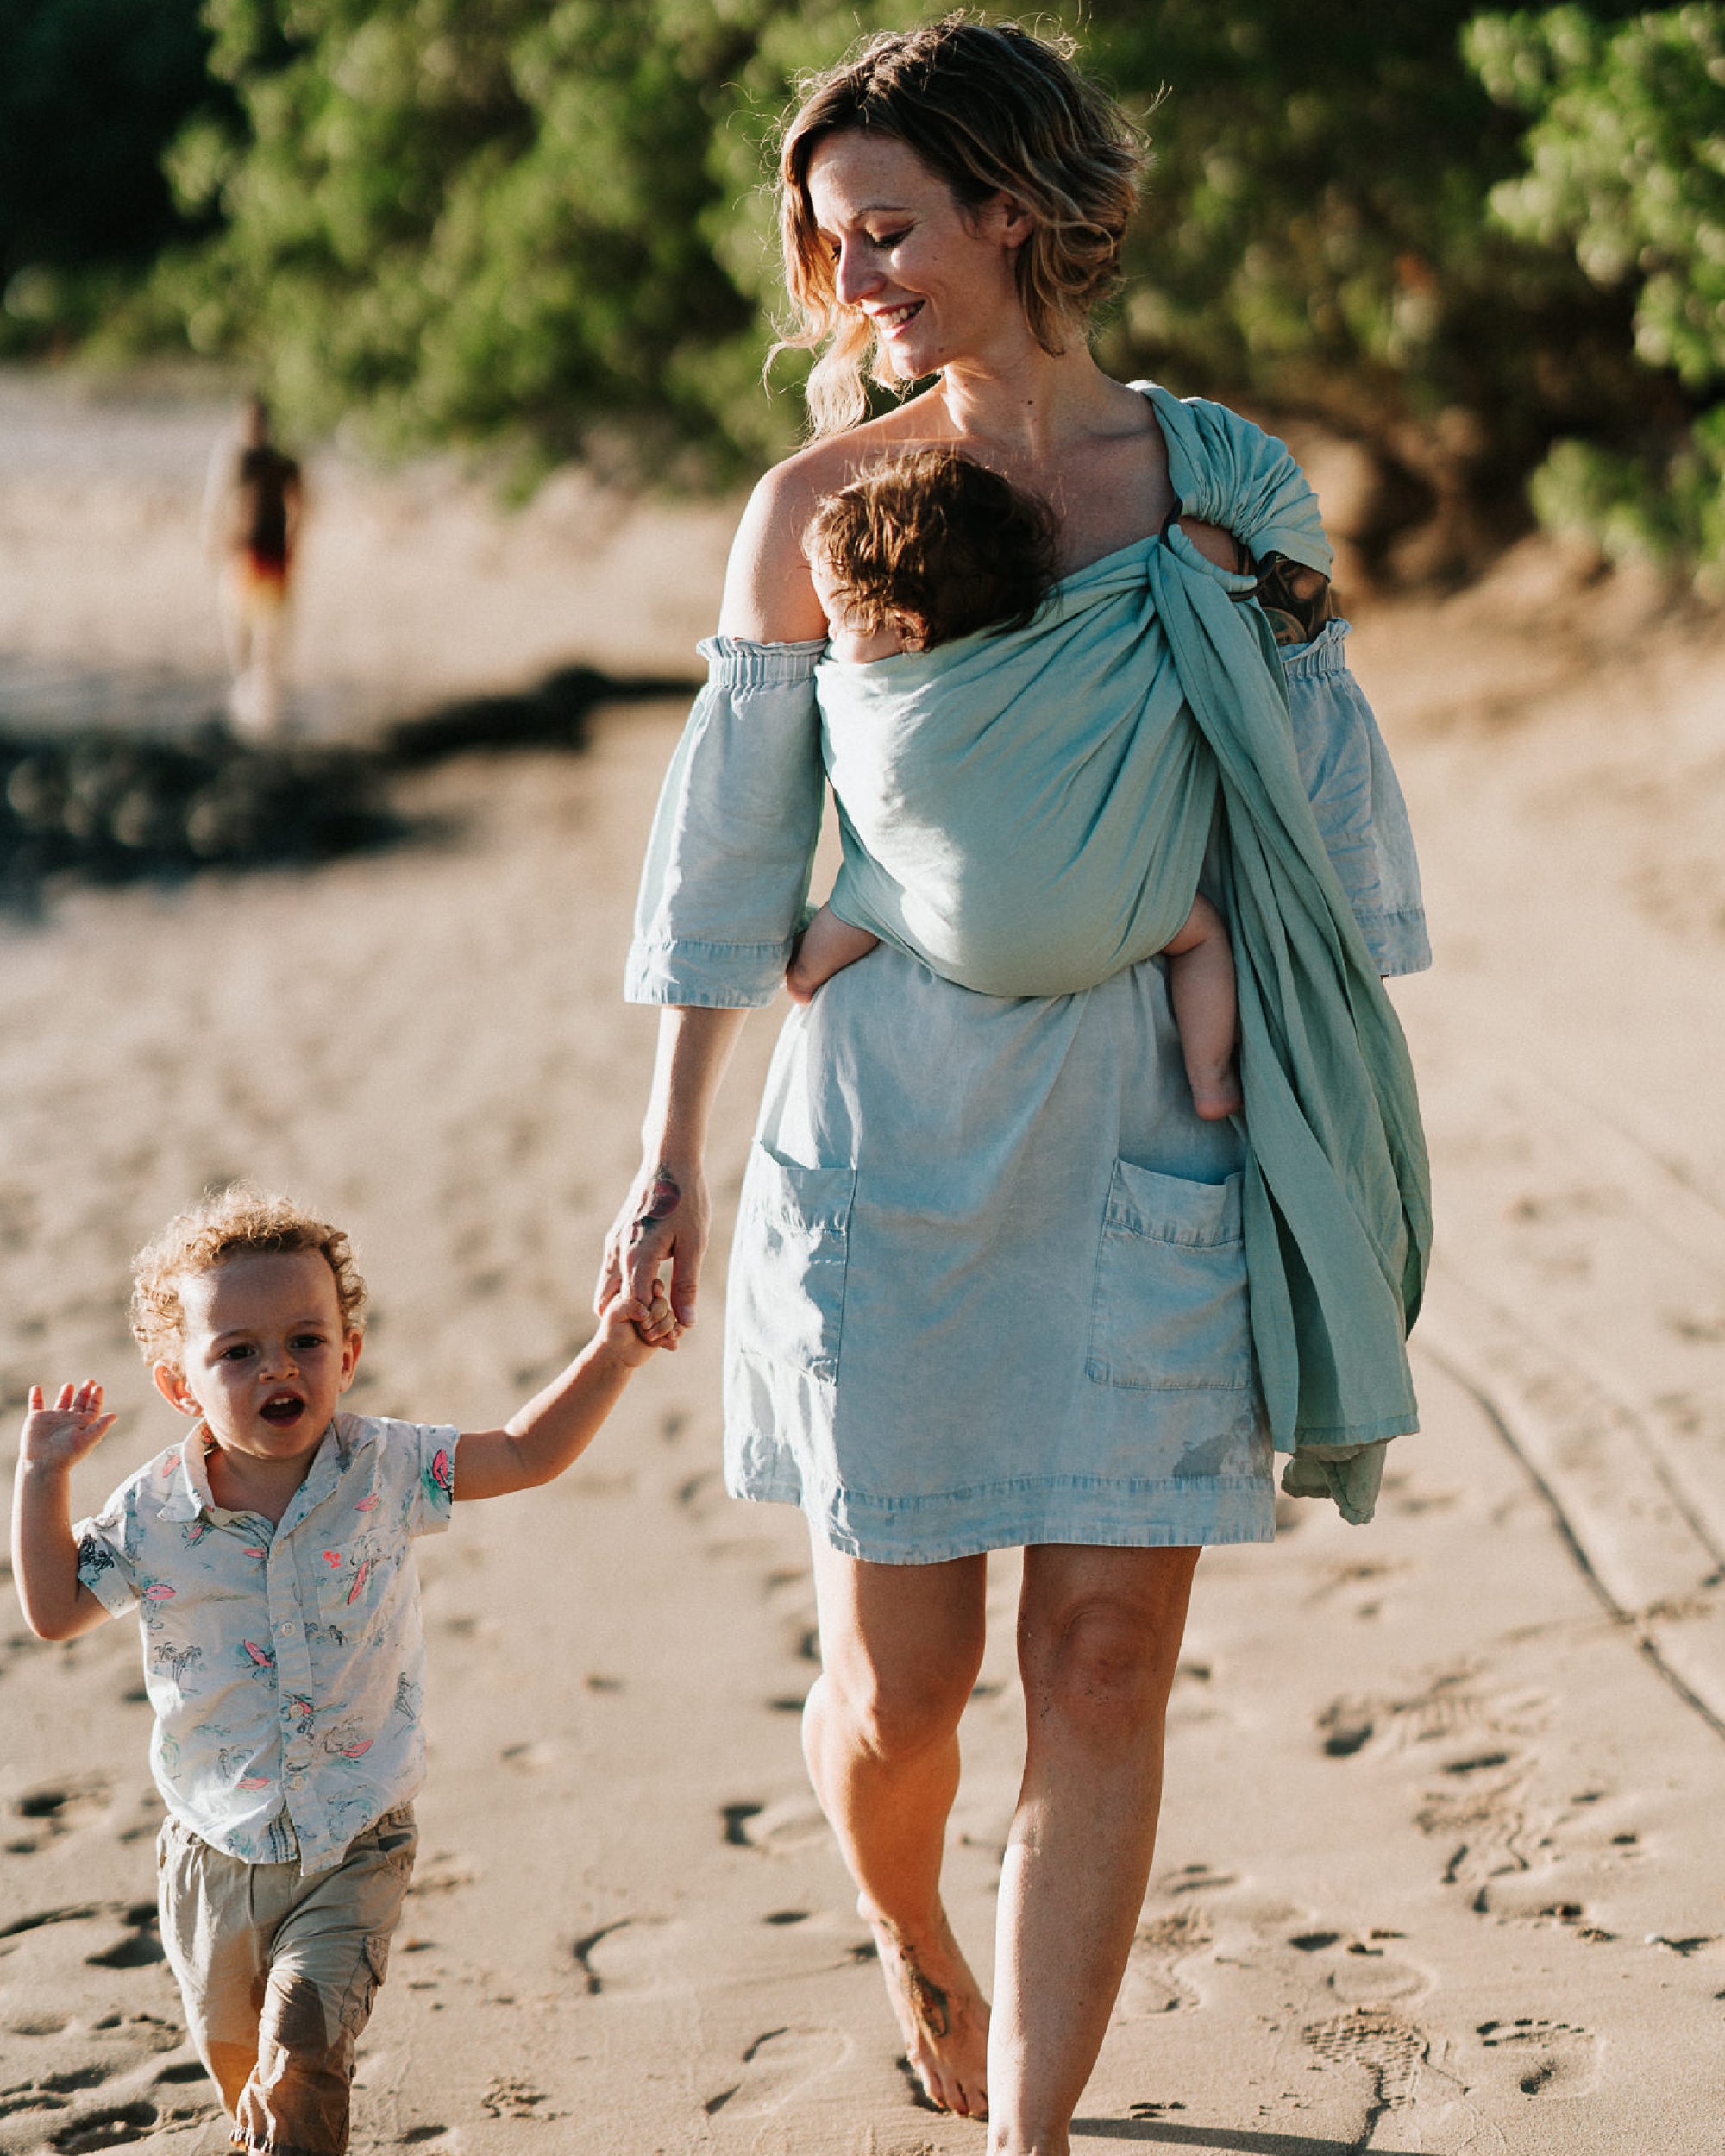 Nurturing Your Post-Winter Wellbeing: Self-Care for Babywearing Moms